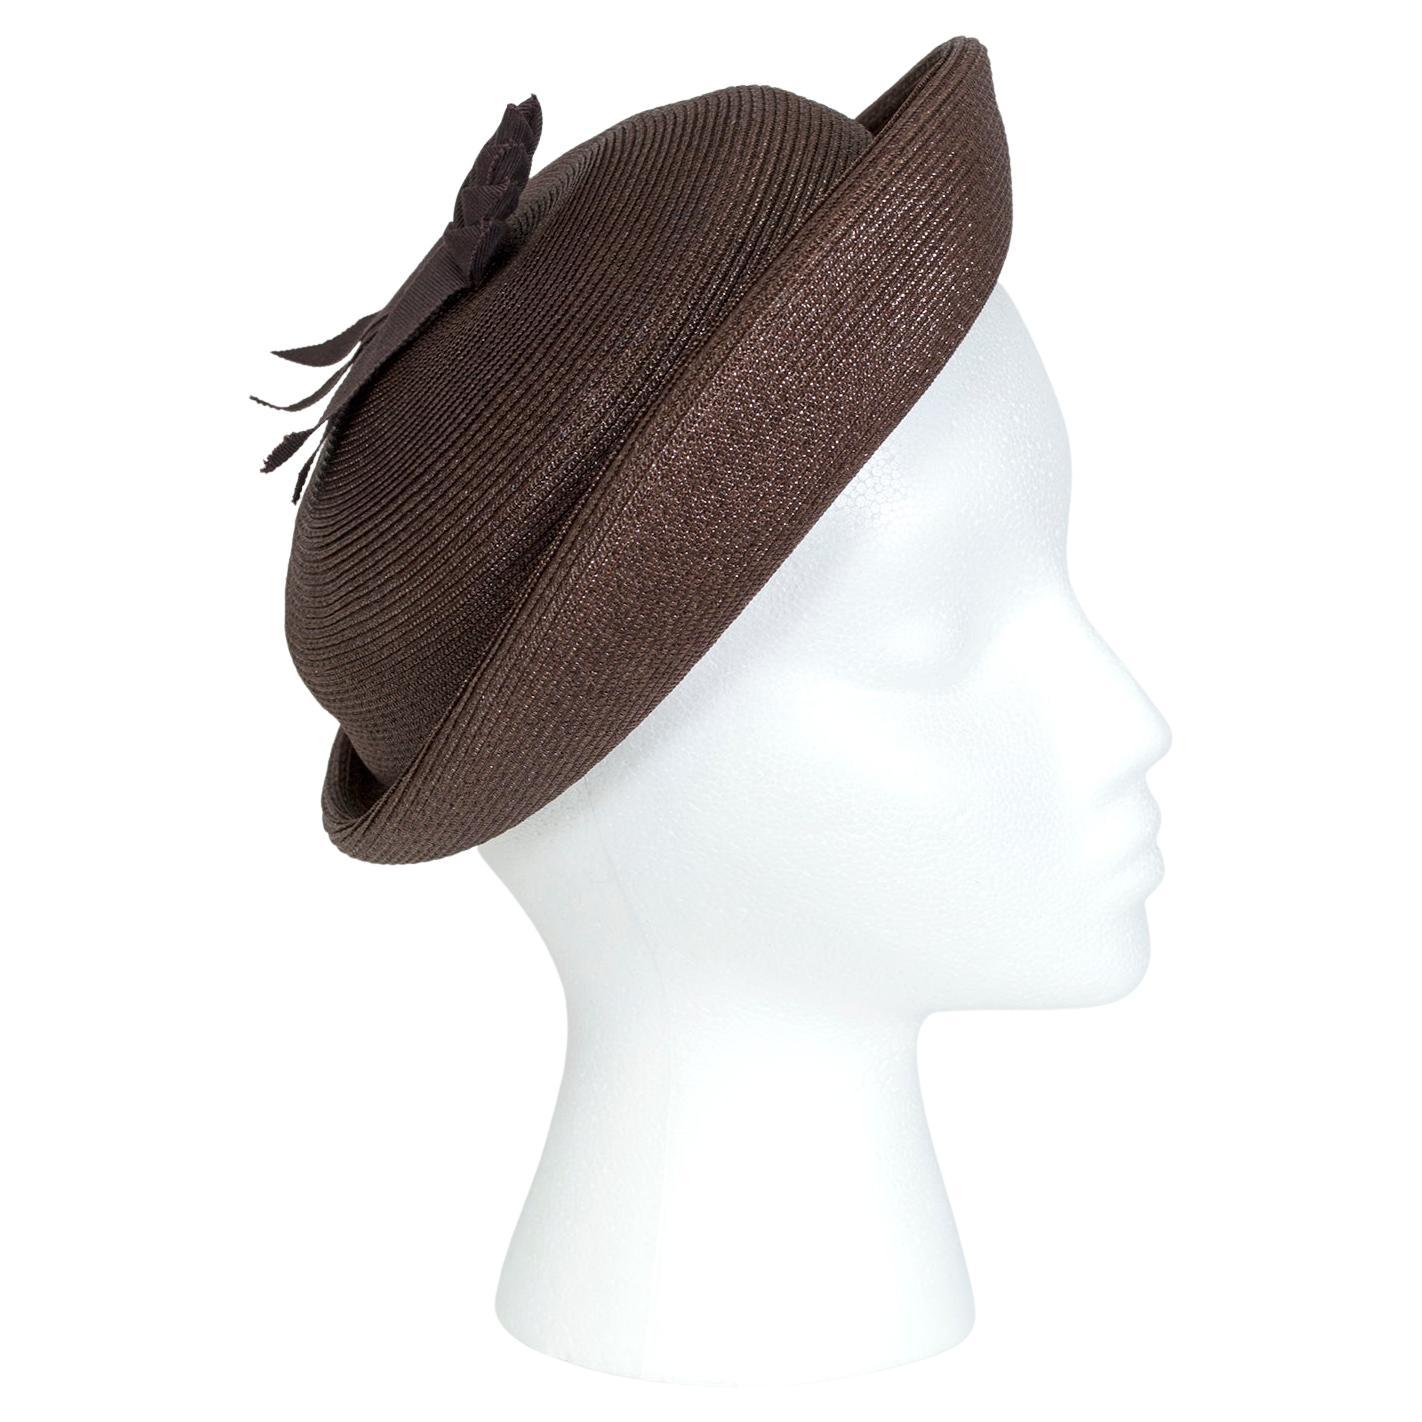 Brown Straw Petite Breton Seaside Hat with Upturned Brim and Bow – S, 1940s